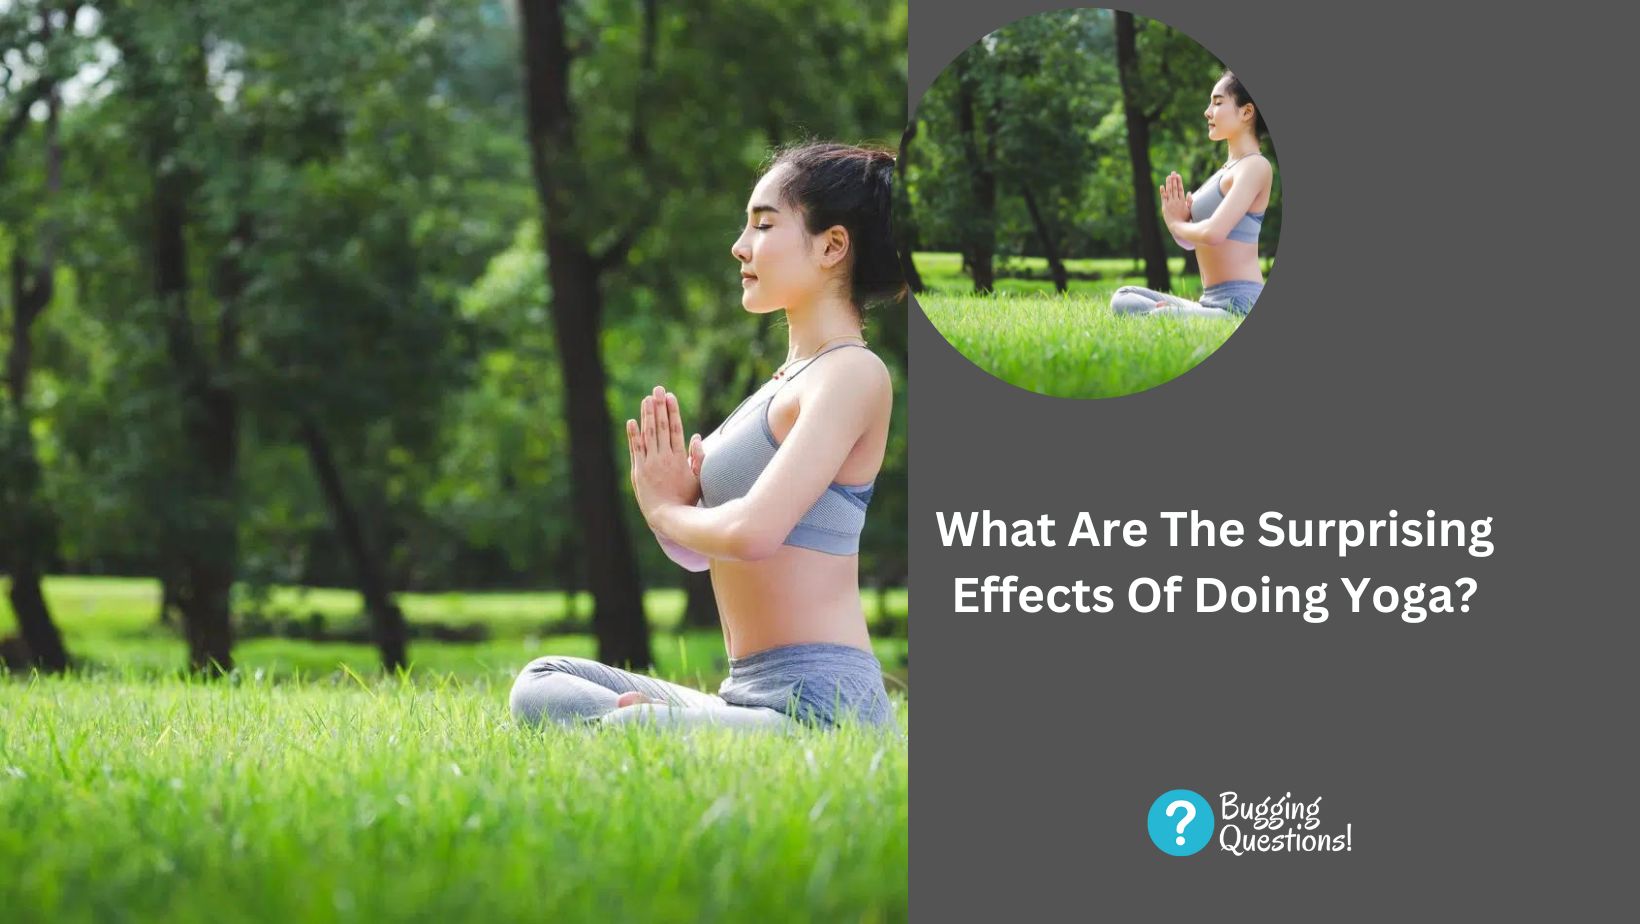 What Are The Surprising Effects Of Doing Yoga?